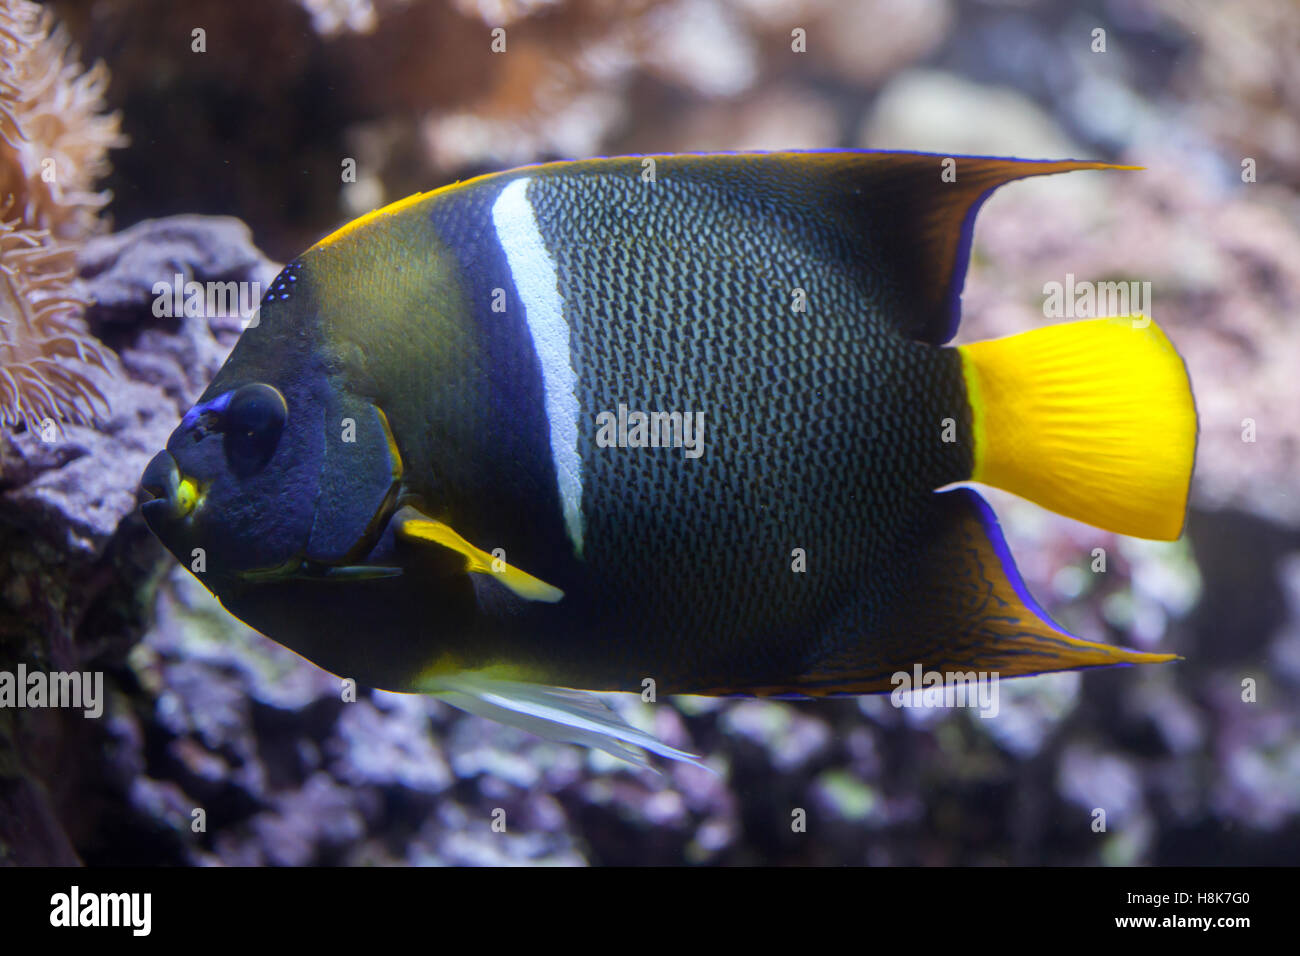 King angelfish (Holacanthus passer), also known as the passer angelfish. Stock Photo